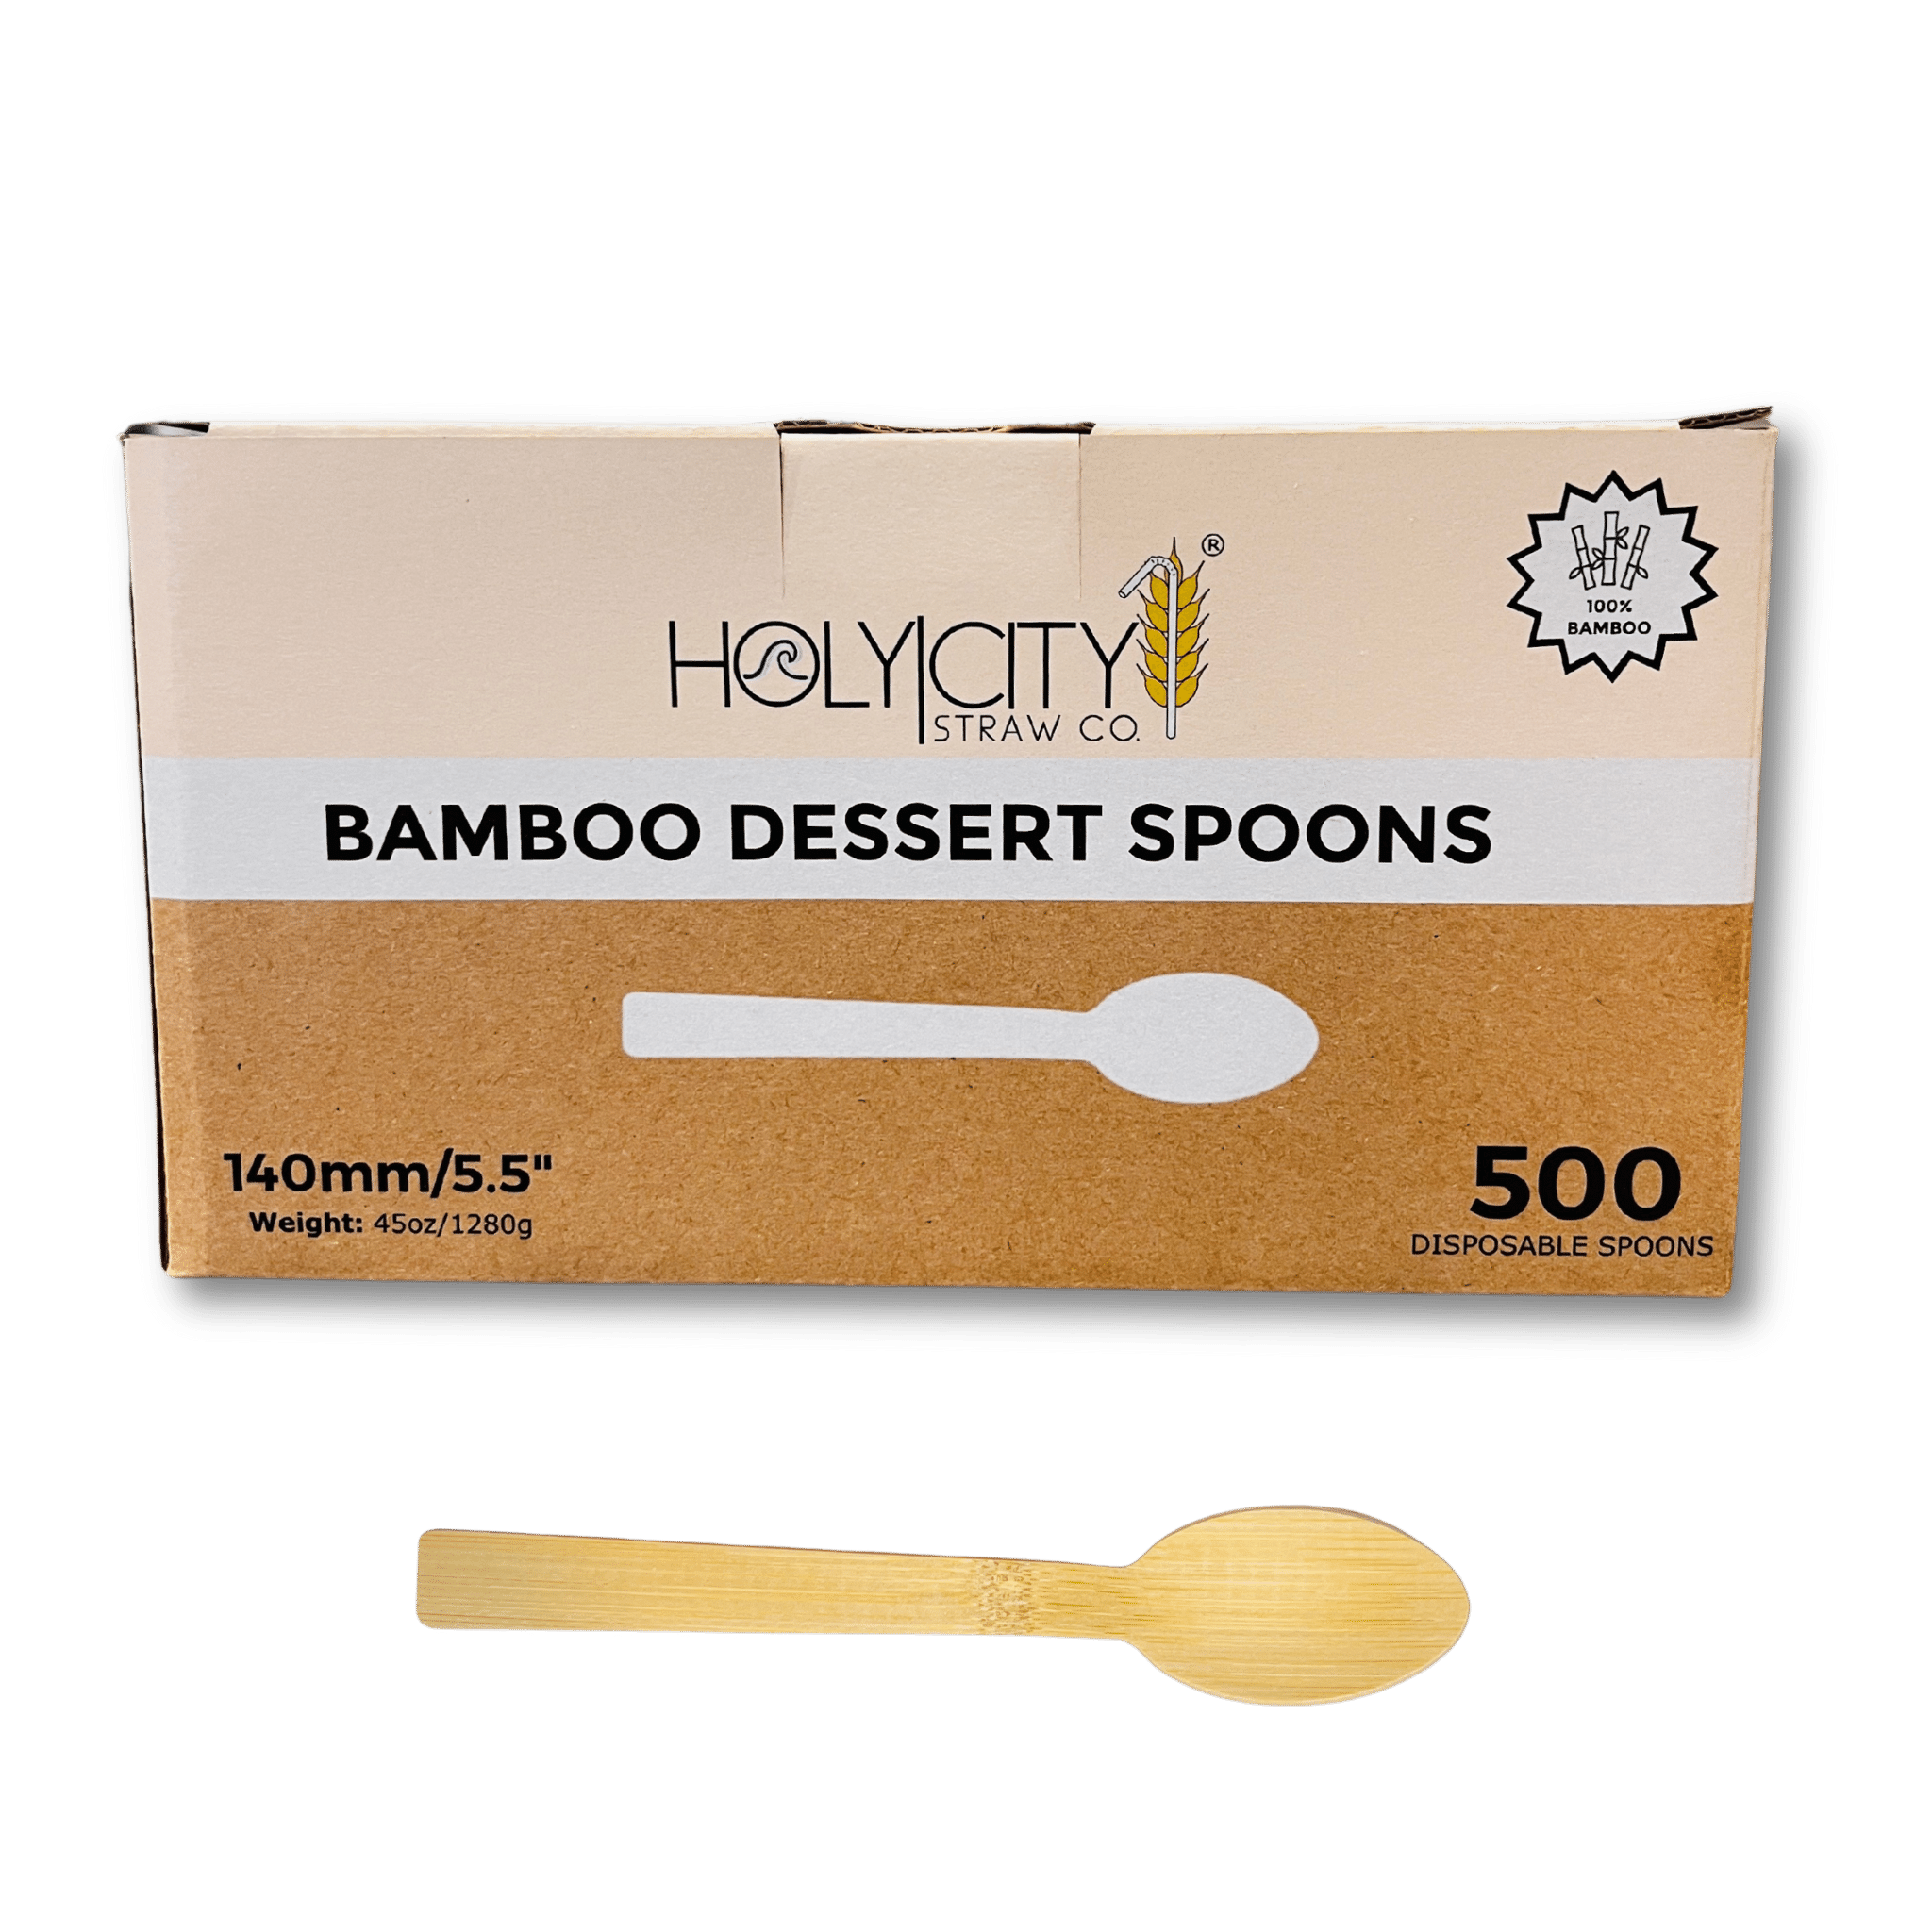 Box of Holy City Straw Company Wrapped Bamboo Dessert Spoons 500 disposable spoons